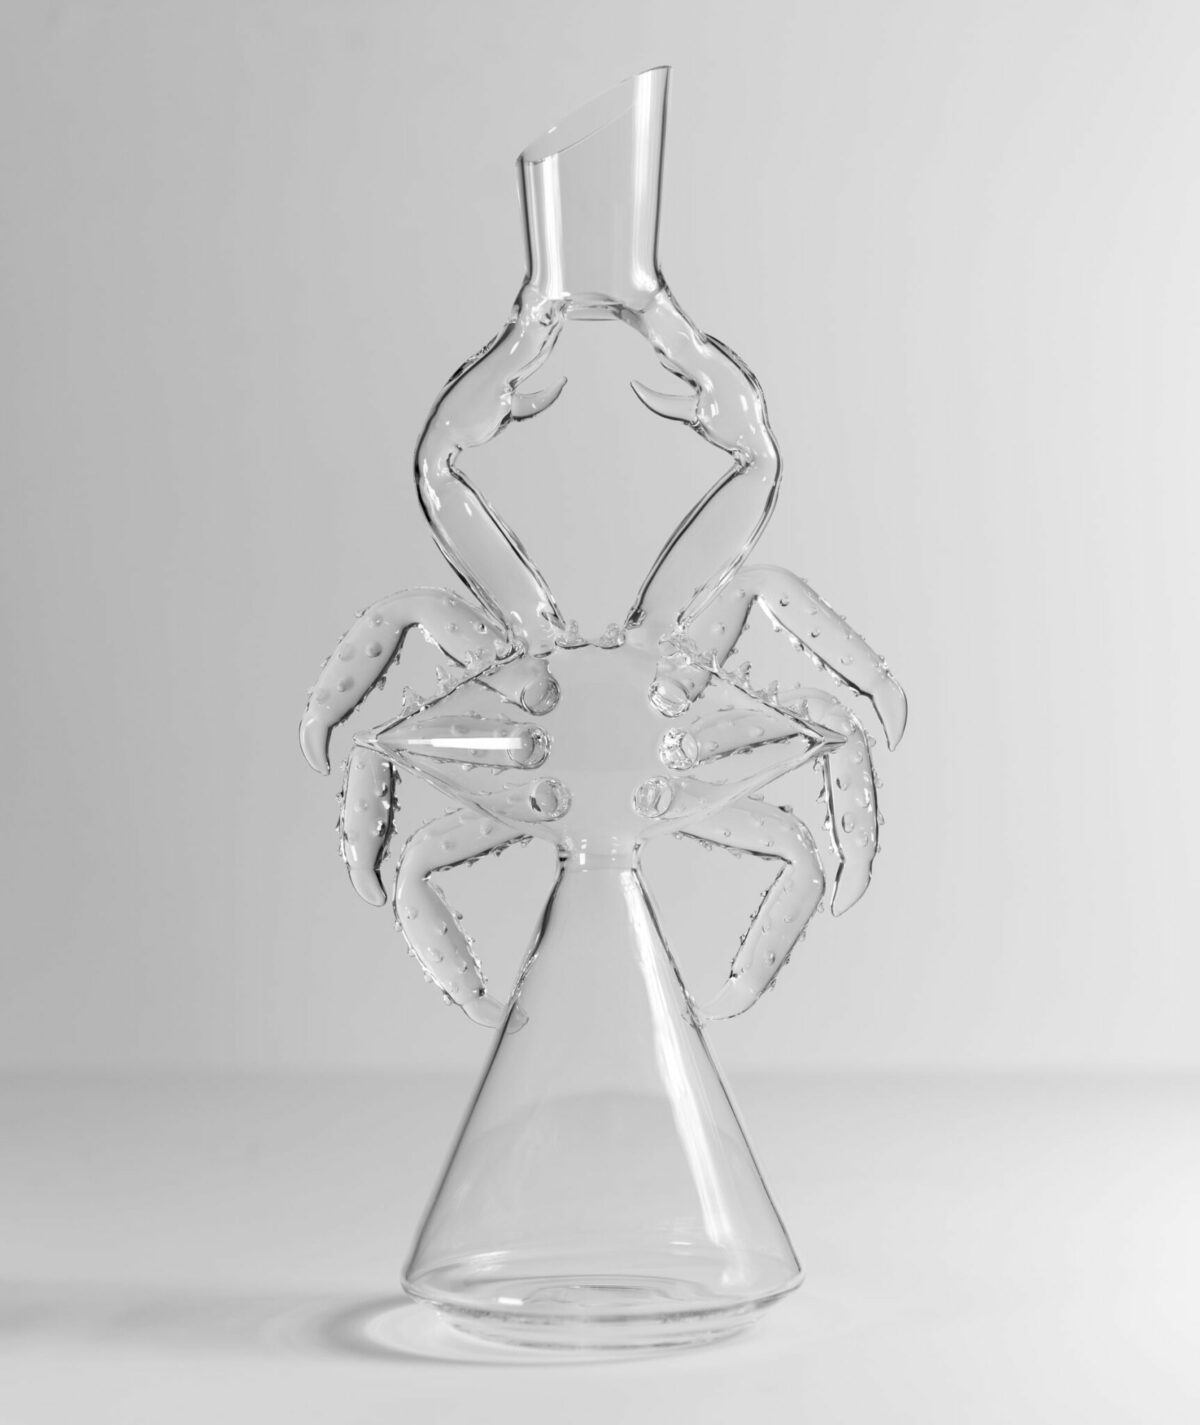 Fantastic Sculptural Wine Decanters In The Form Of Sea Creatures By Charlie Matz 6